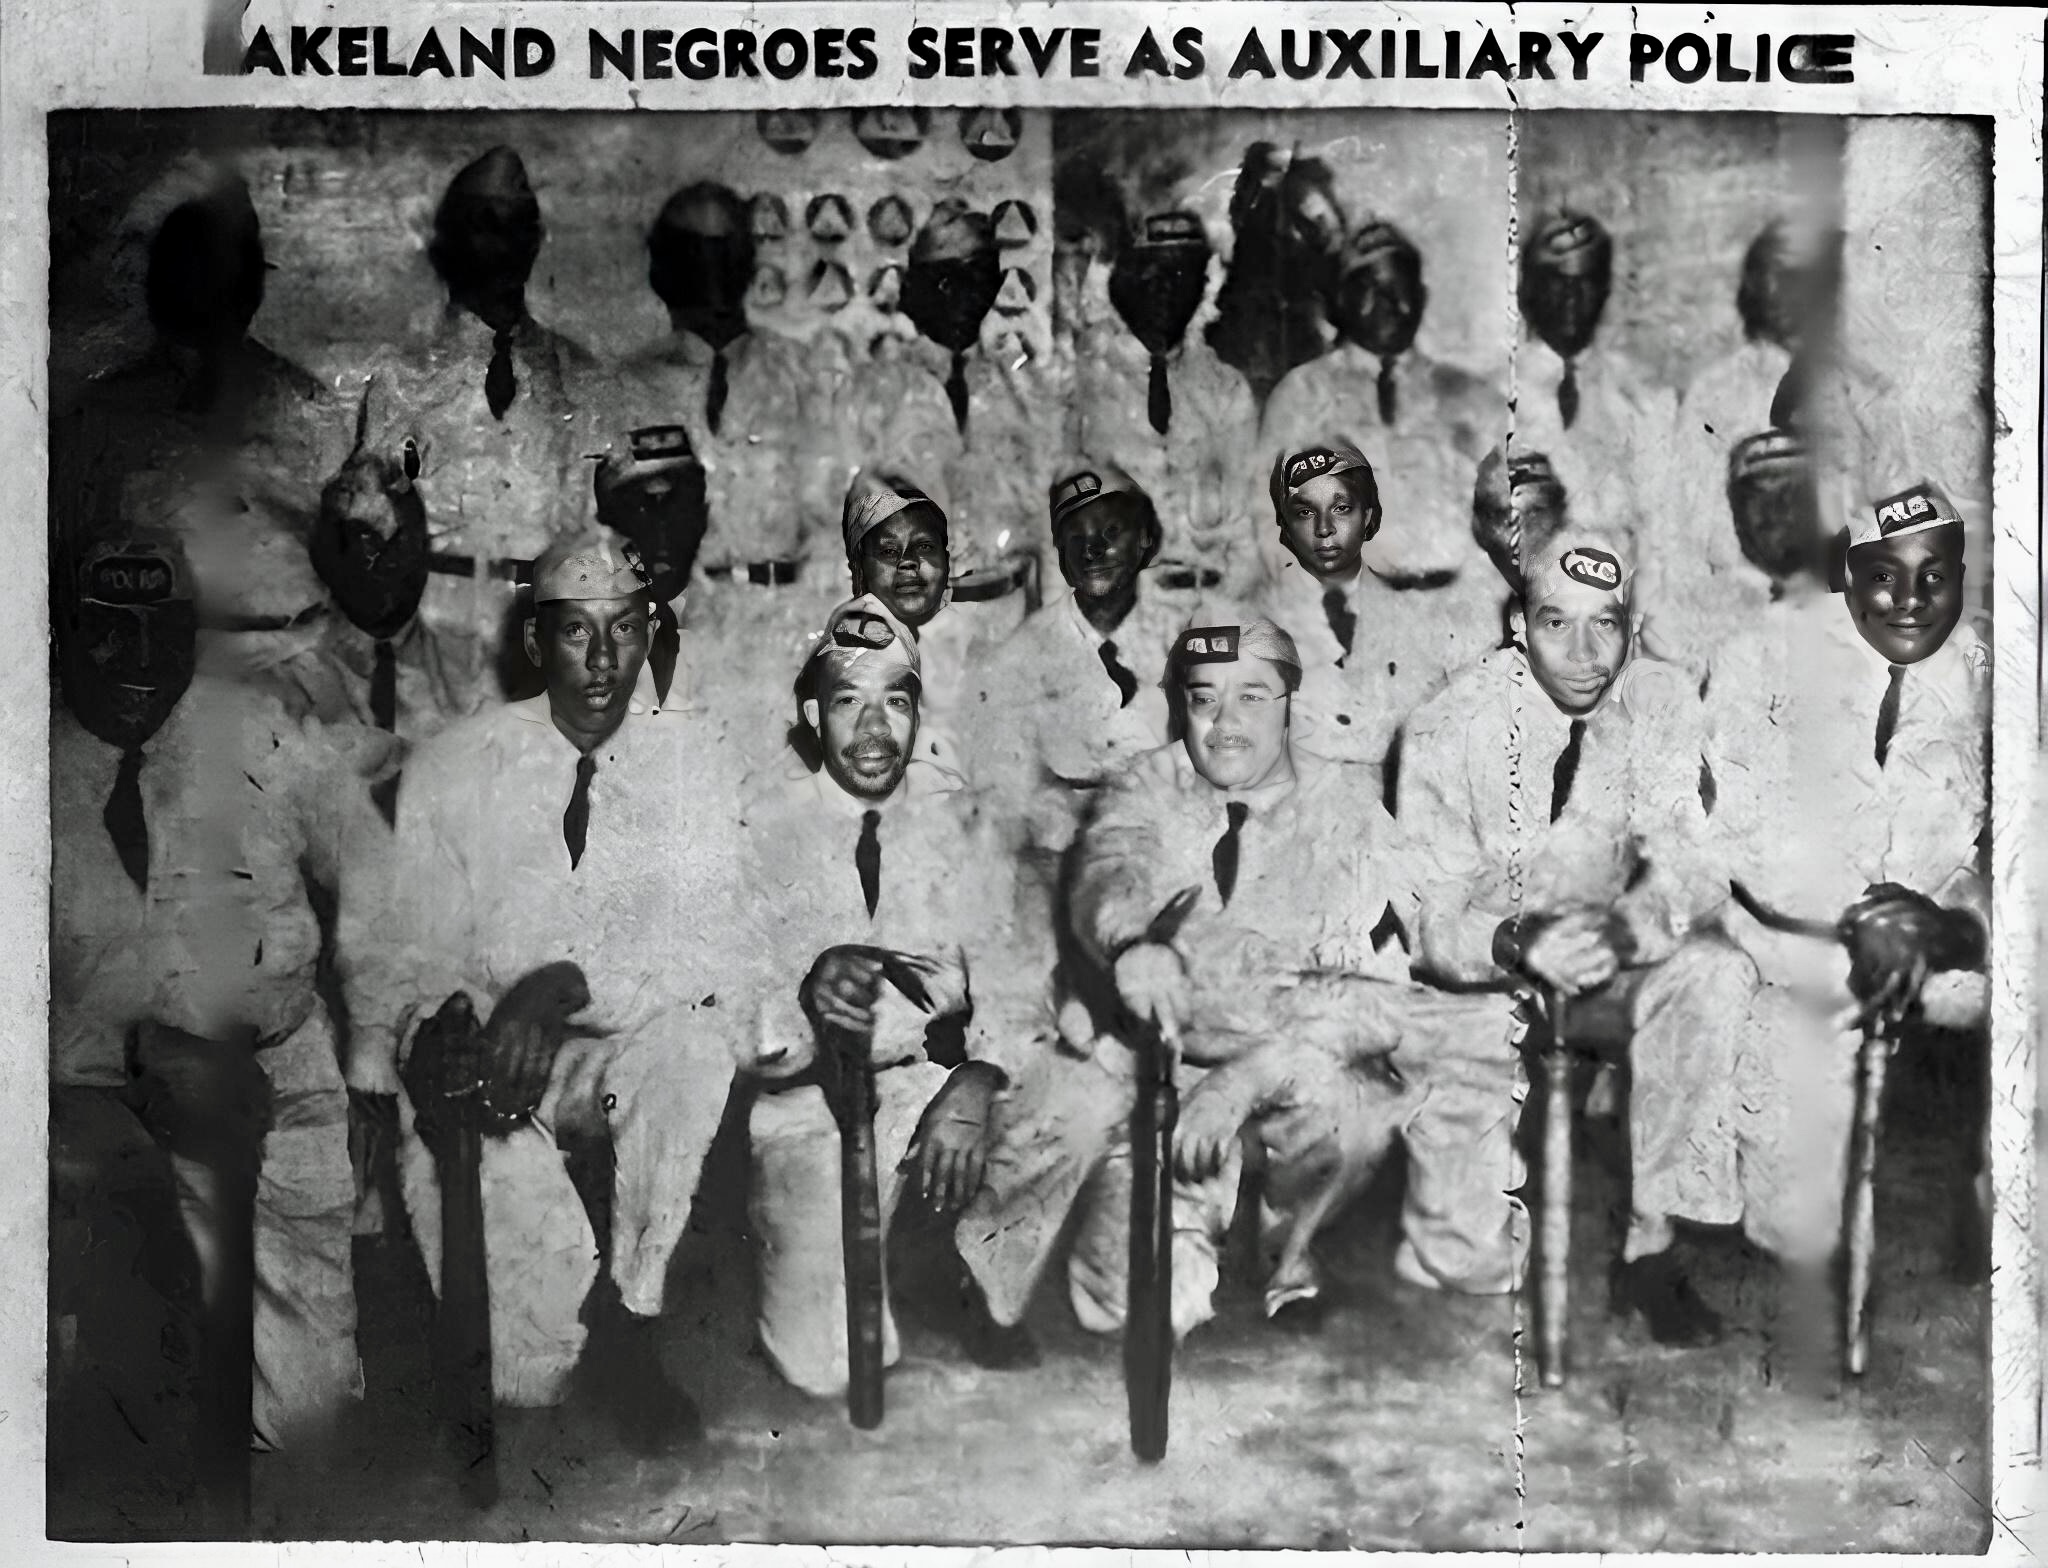 Paul A. Diggs (lower left) organized and was the captain of an all-Black auxiliary police squad -- shown here in 1943 -- that patrolled the northwest community without guns. The Negro Auxiliary was a volunteer arm of the Lakeland Police force. Members were authorized to make arrests in the Black community but held no authority outside that area. (Photo: Lakeland Public Library)